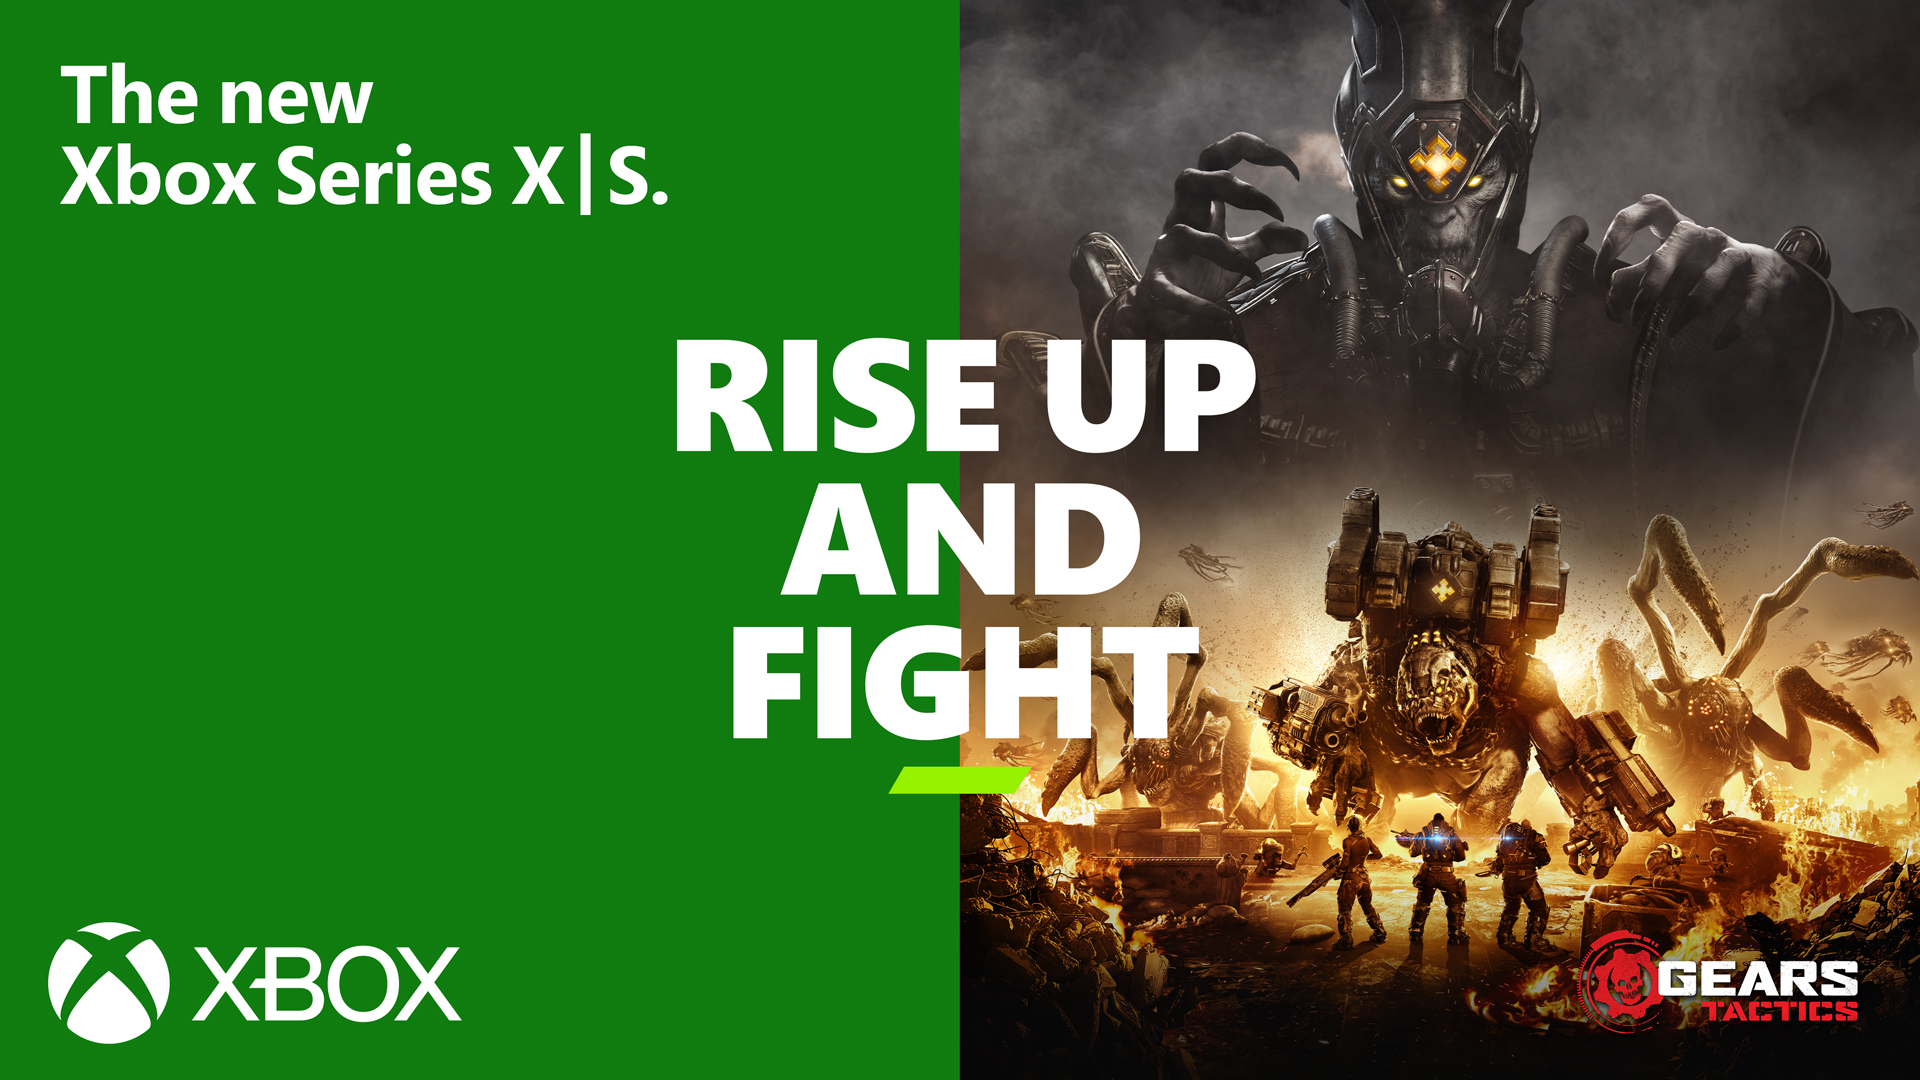 Klobrille on X: Gears 5 Optimized for Xbox Series X gameplay in